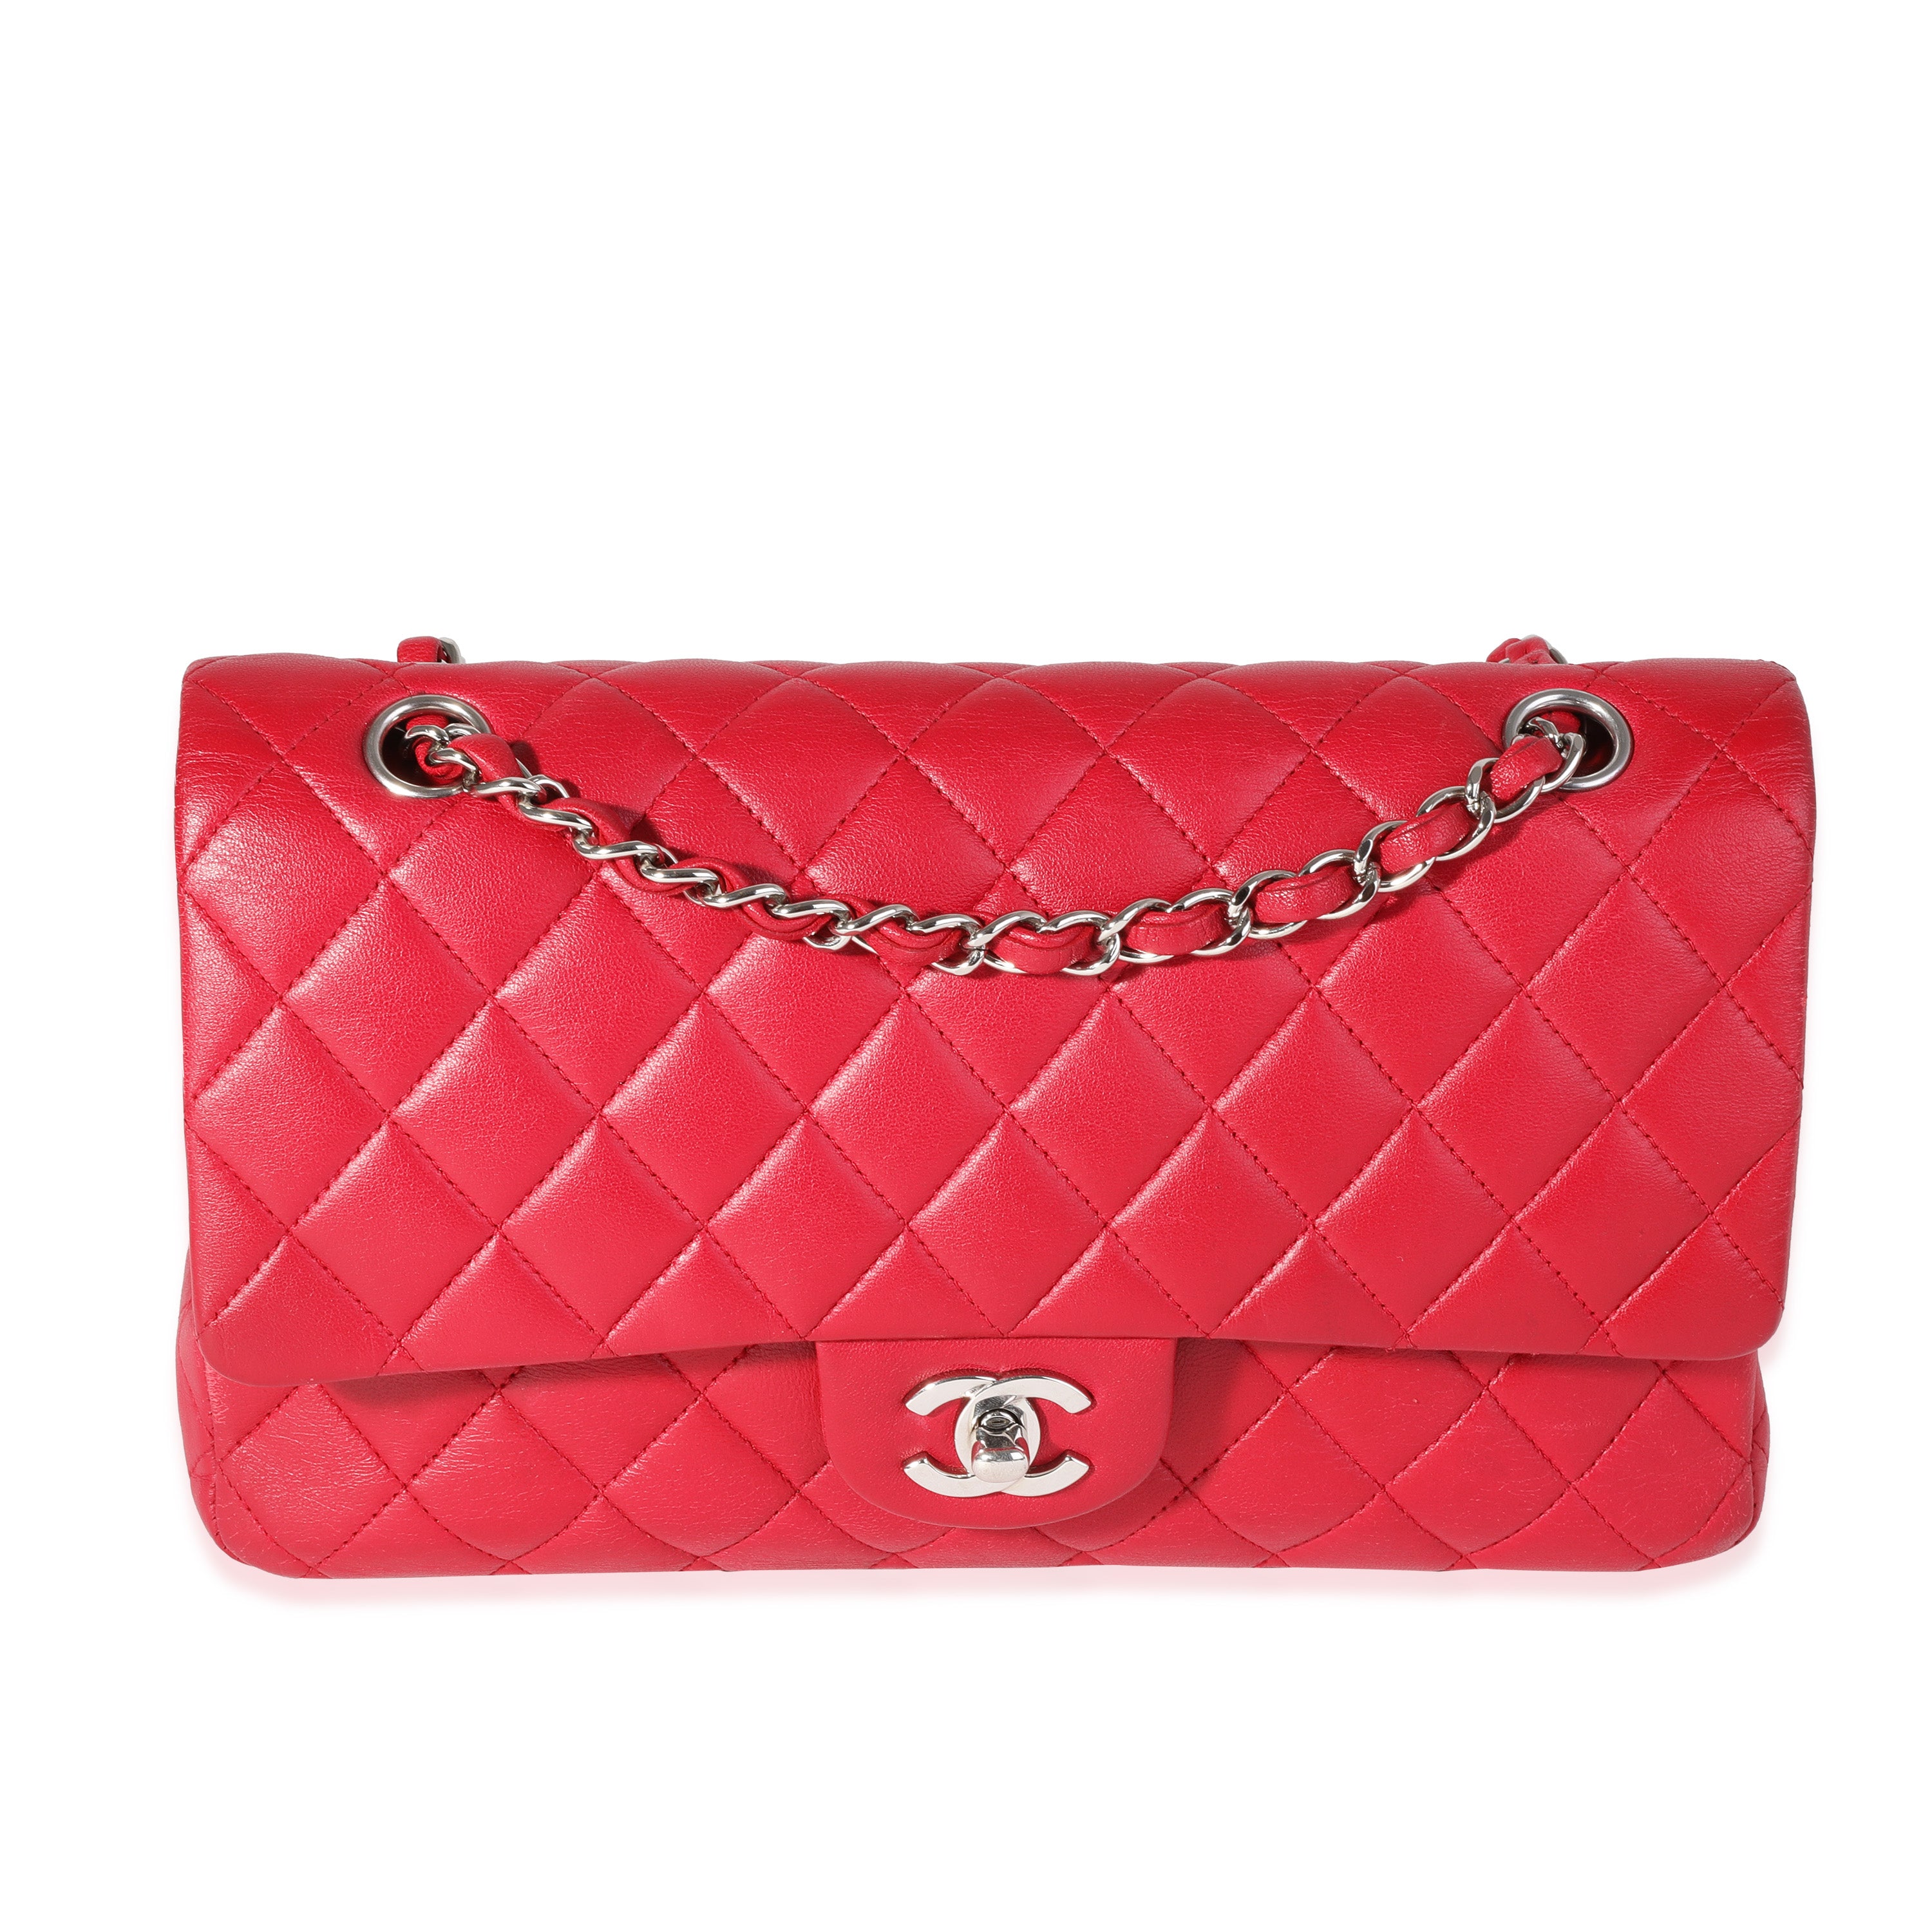 Chanel Periwinkle Quilted Lambskin Medium Classic Double Flap, myGemma